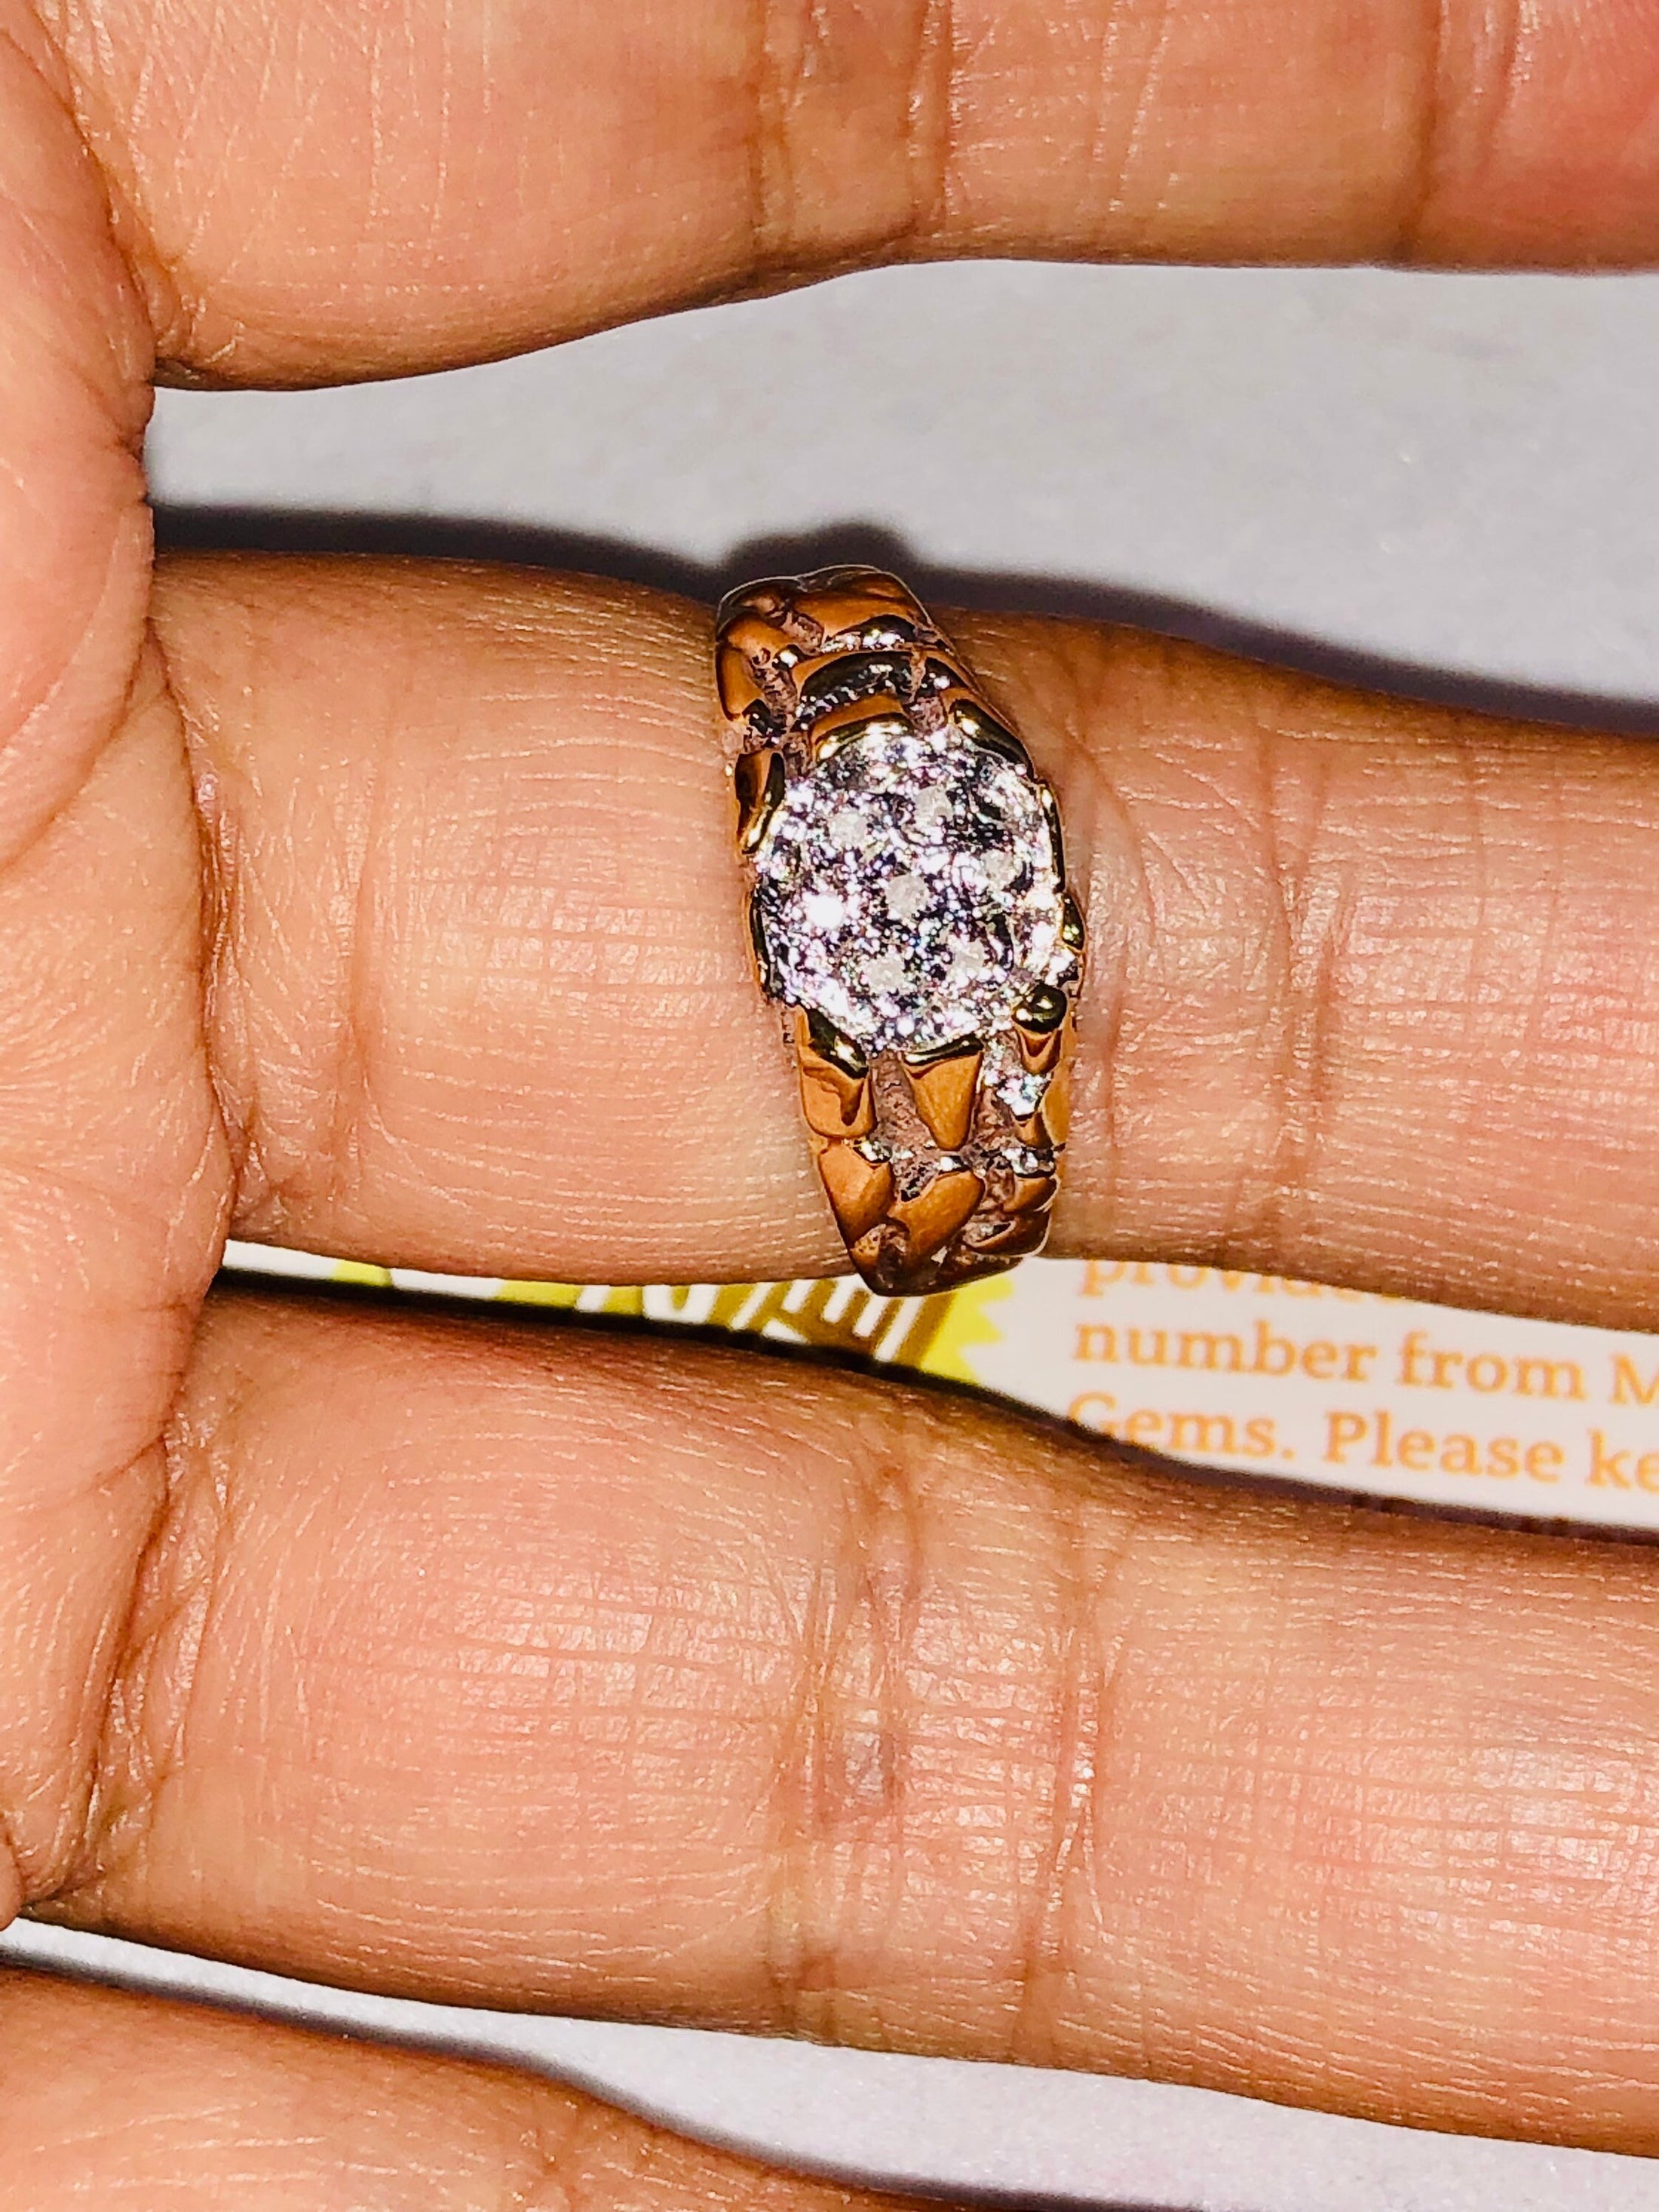 Men’s Real Diamond Ring! Huge Sale! Comes with certificate of authenticity. Not CZ not fake!